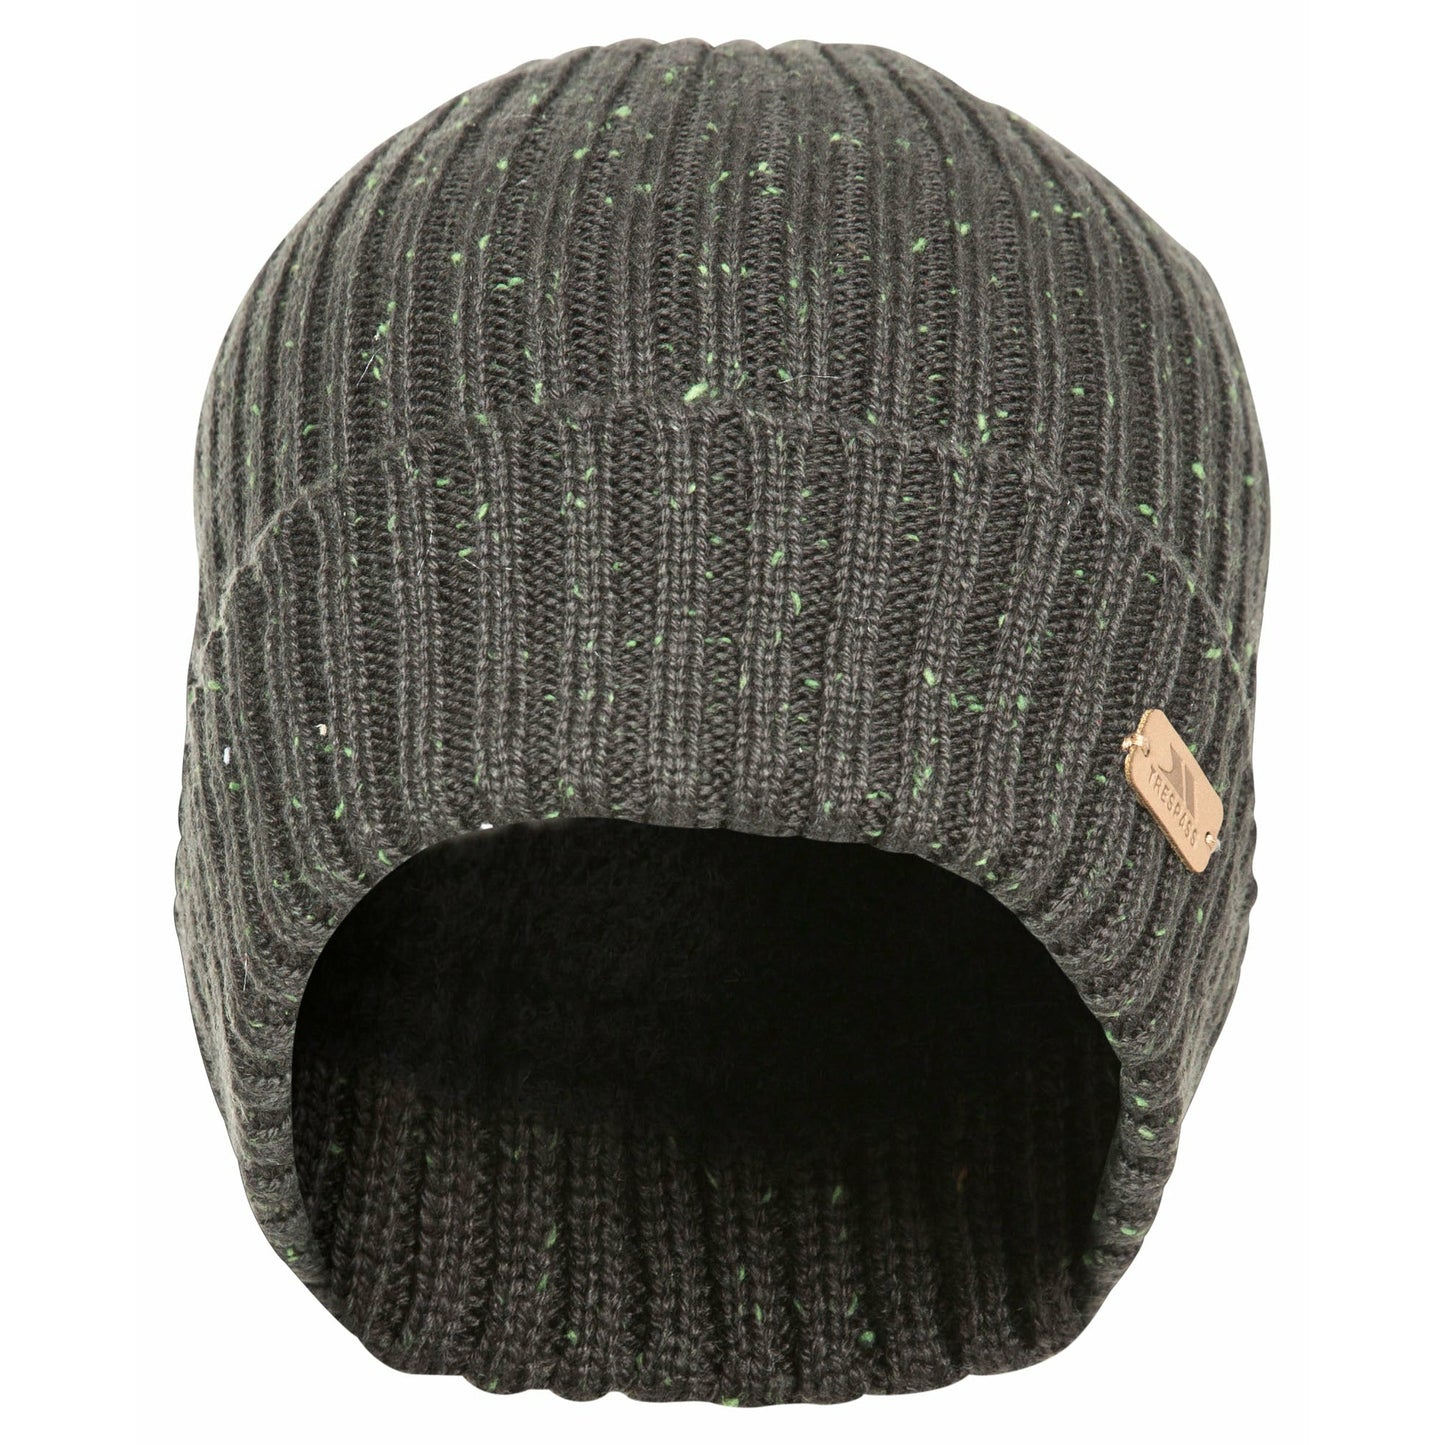 Mateo Lined Knitted Beanie Hat - Olive Fleck